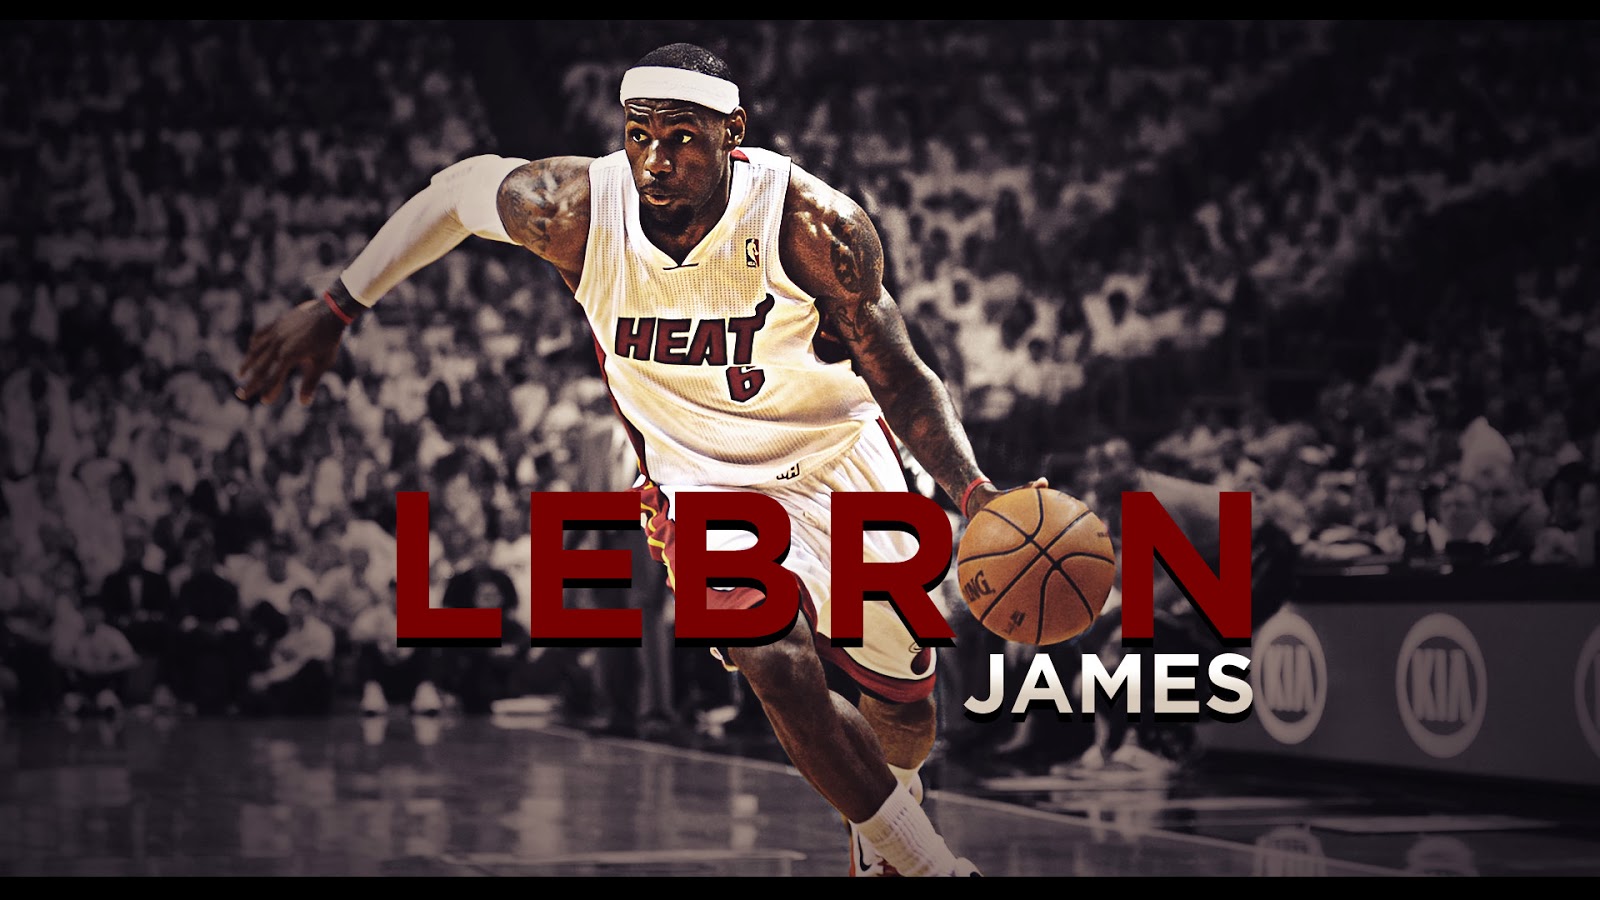 Lebron James New Wallpaper Its All About Basketball